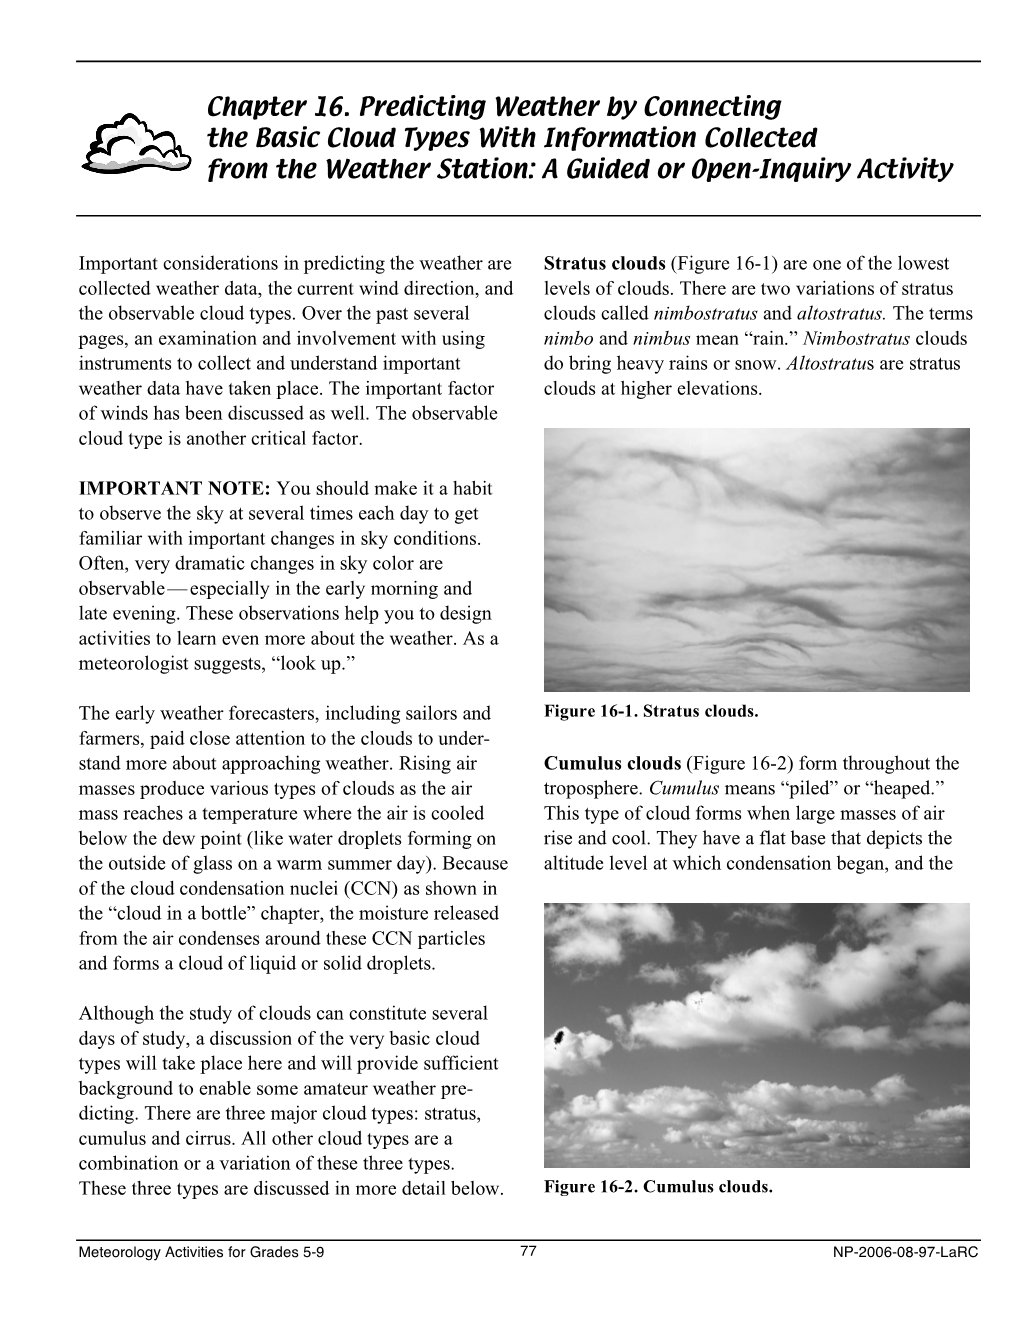 Chapter 16. Predicting Weather by Connecting the Basic Cloud Types with Information Collected from the Weather Station: a Guided Or Open-Inquiry Activity